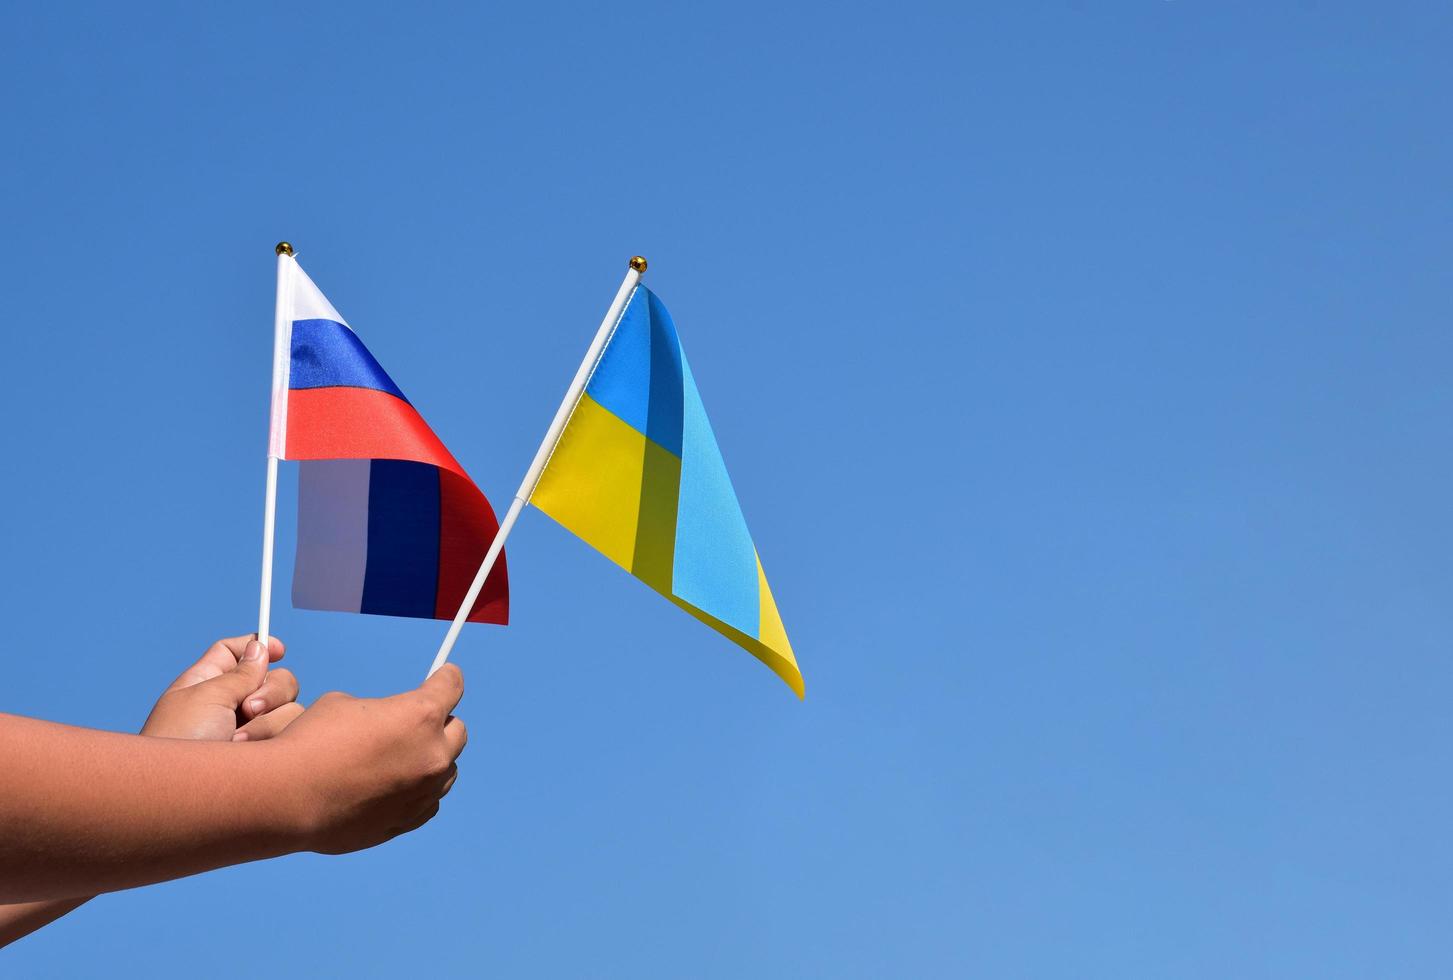 Russian national flag and Ukrainian national flag holding in hands against bluesky background, soft and selective focus. photo